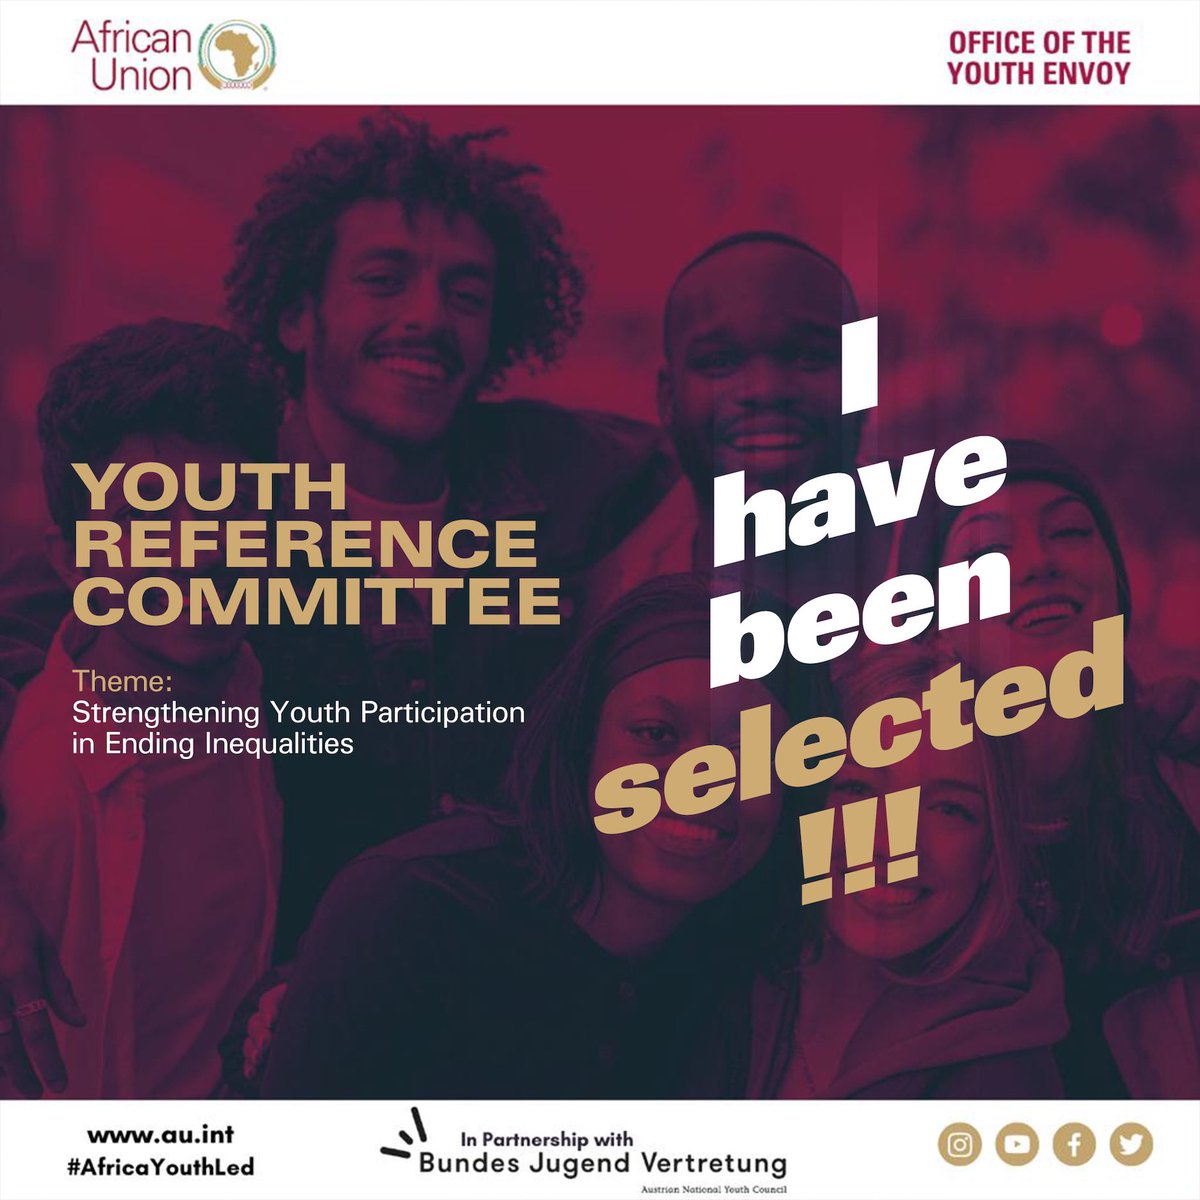 I am excited to announce that I have been selected to join the Youth Reference Committee! I look forward to engaging with young people on Youth Civic Engagement & Advocacy. 

Let’s get to work. 

 #AfricaYouthLed #AUYRC2023 #SDGs4Agenda2063 #Partnerships4Change